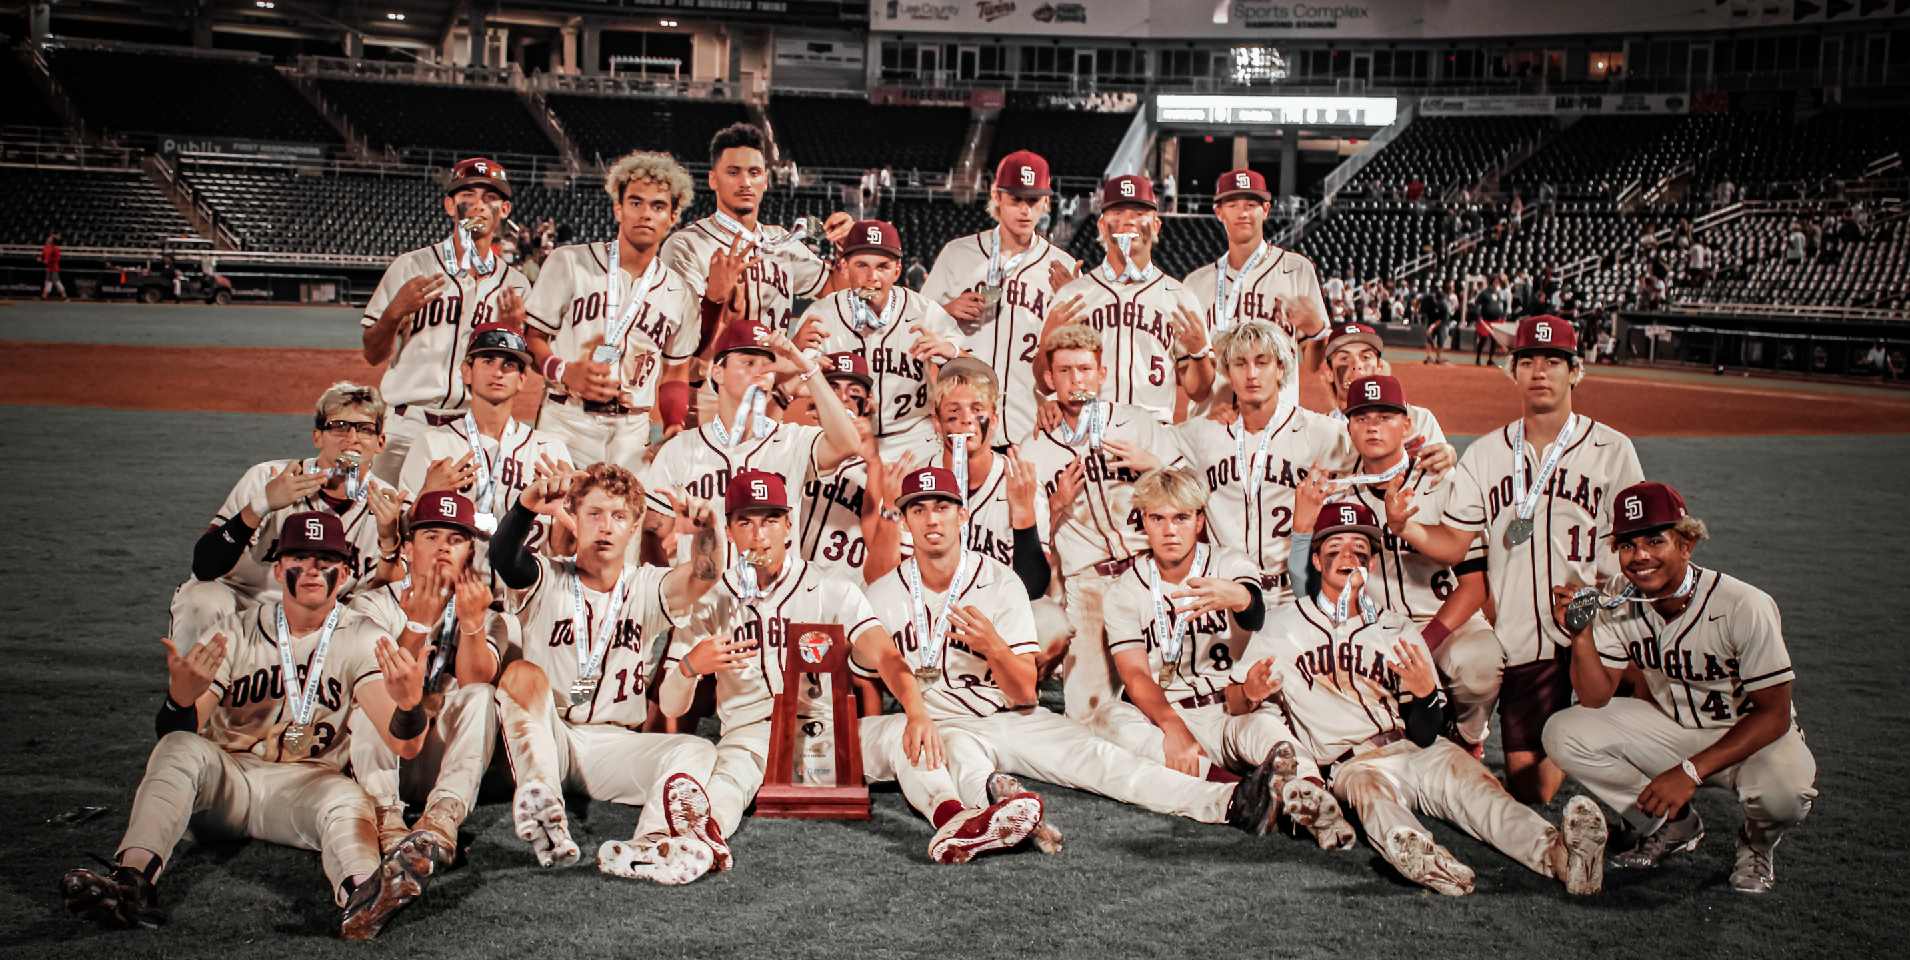 3-Peat: Marjory Stoneman Douglas Baseball Captures 3rd Straight State Championship With Undefeated Season